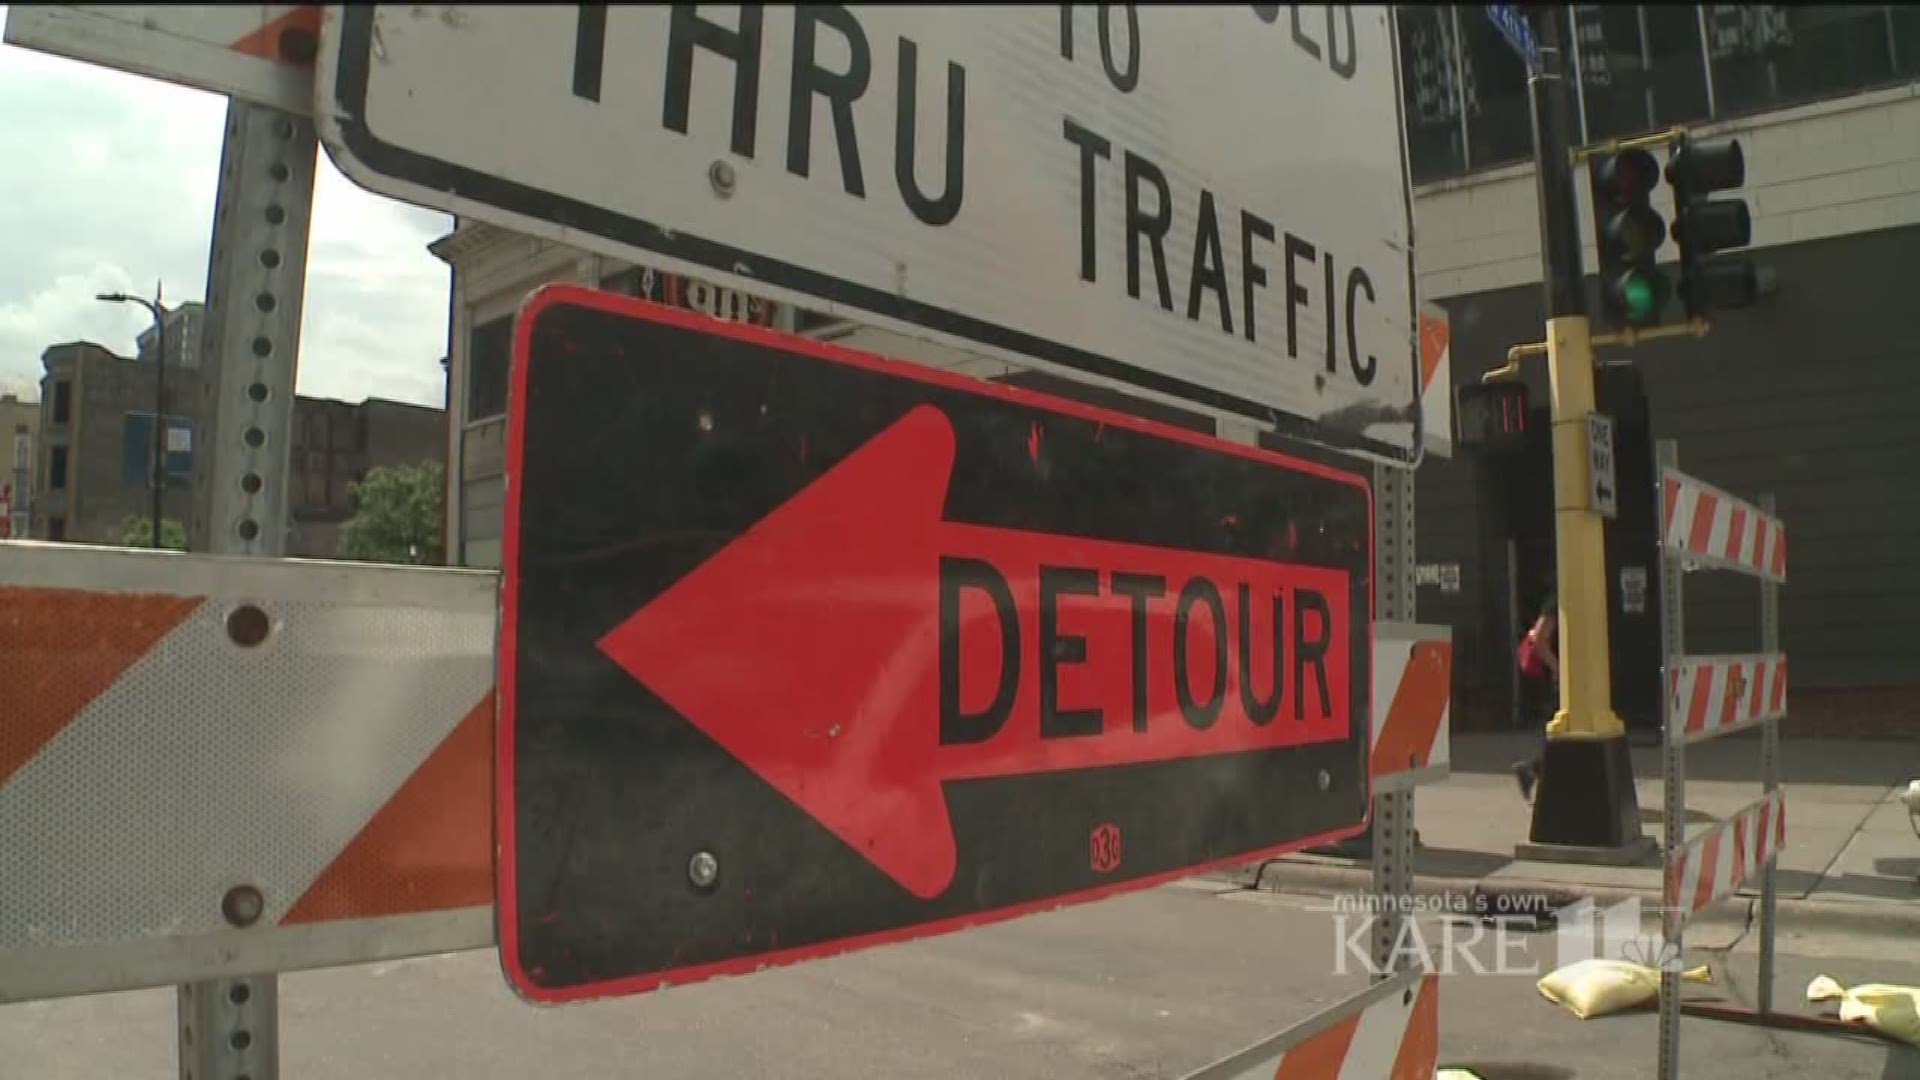 Jon Wertjes, Director of Traffic for the City of Minneapolis, is busy prepping for the influx of visitors coming this February. http://kare11.tv/2wfnJER